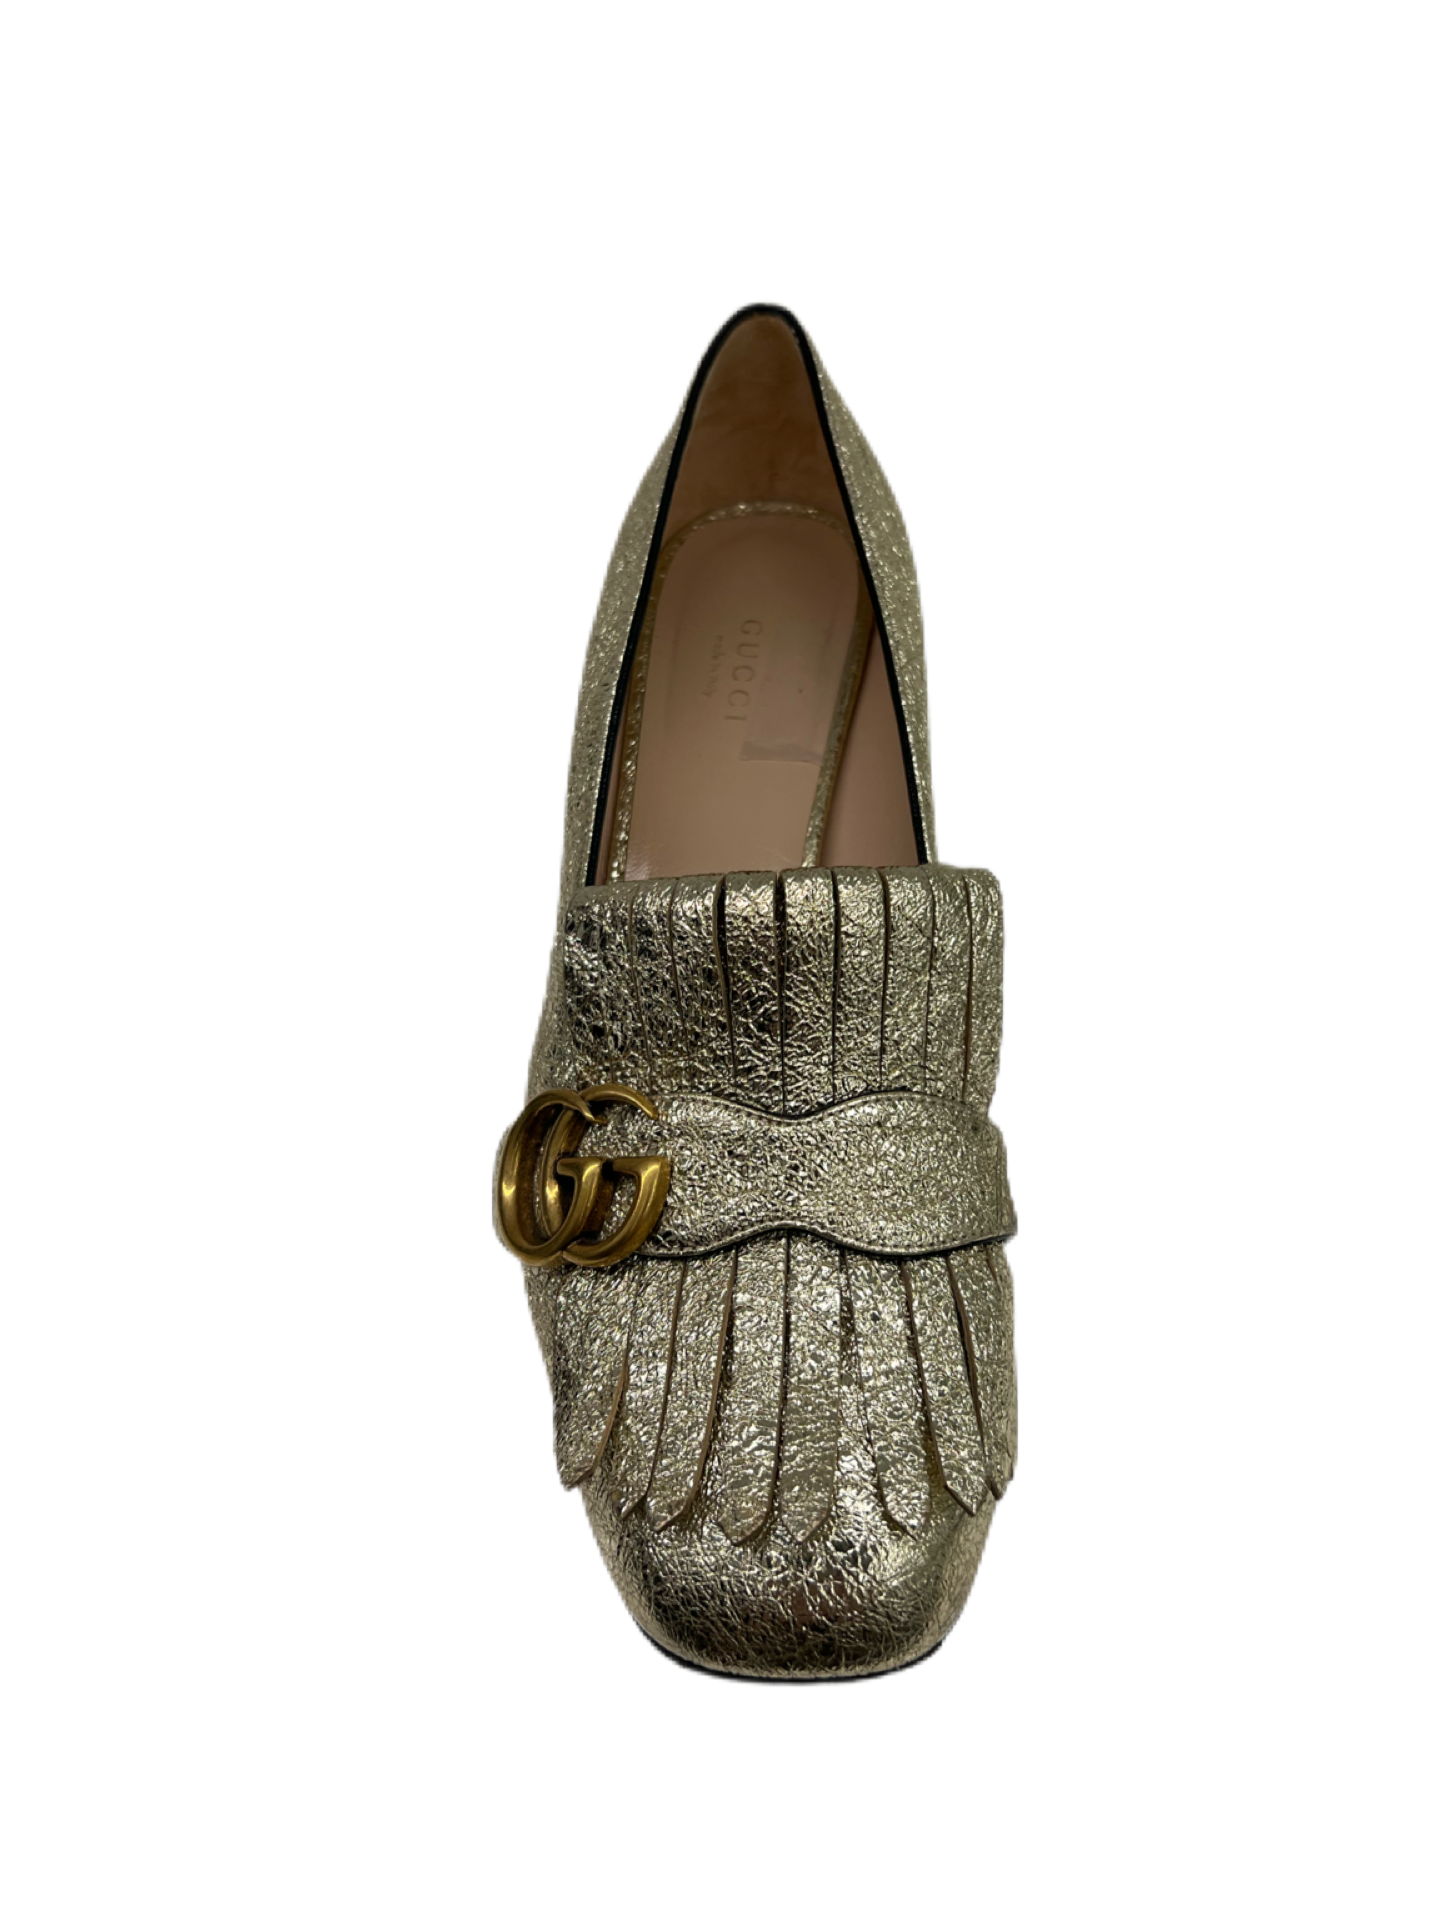 Gucci Gold Crinkled Leather GG Marmont Fringe Pumps. Size: 40